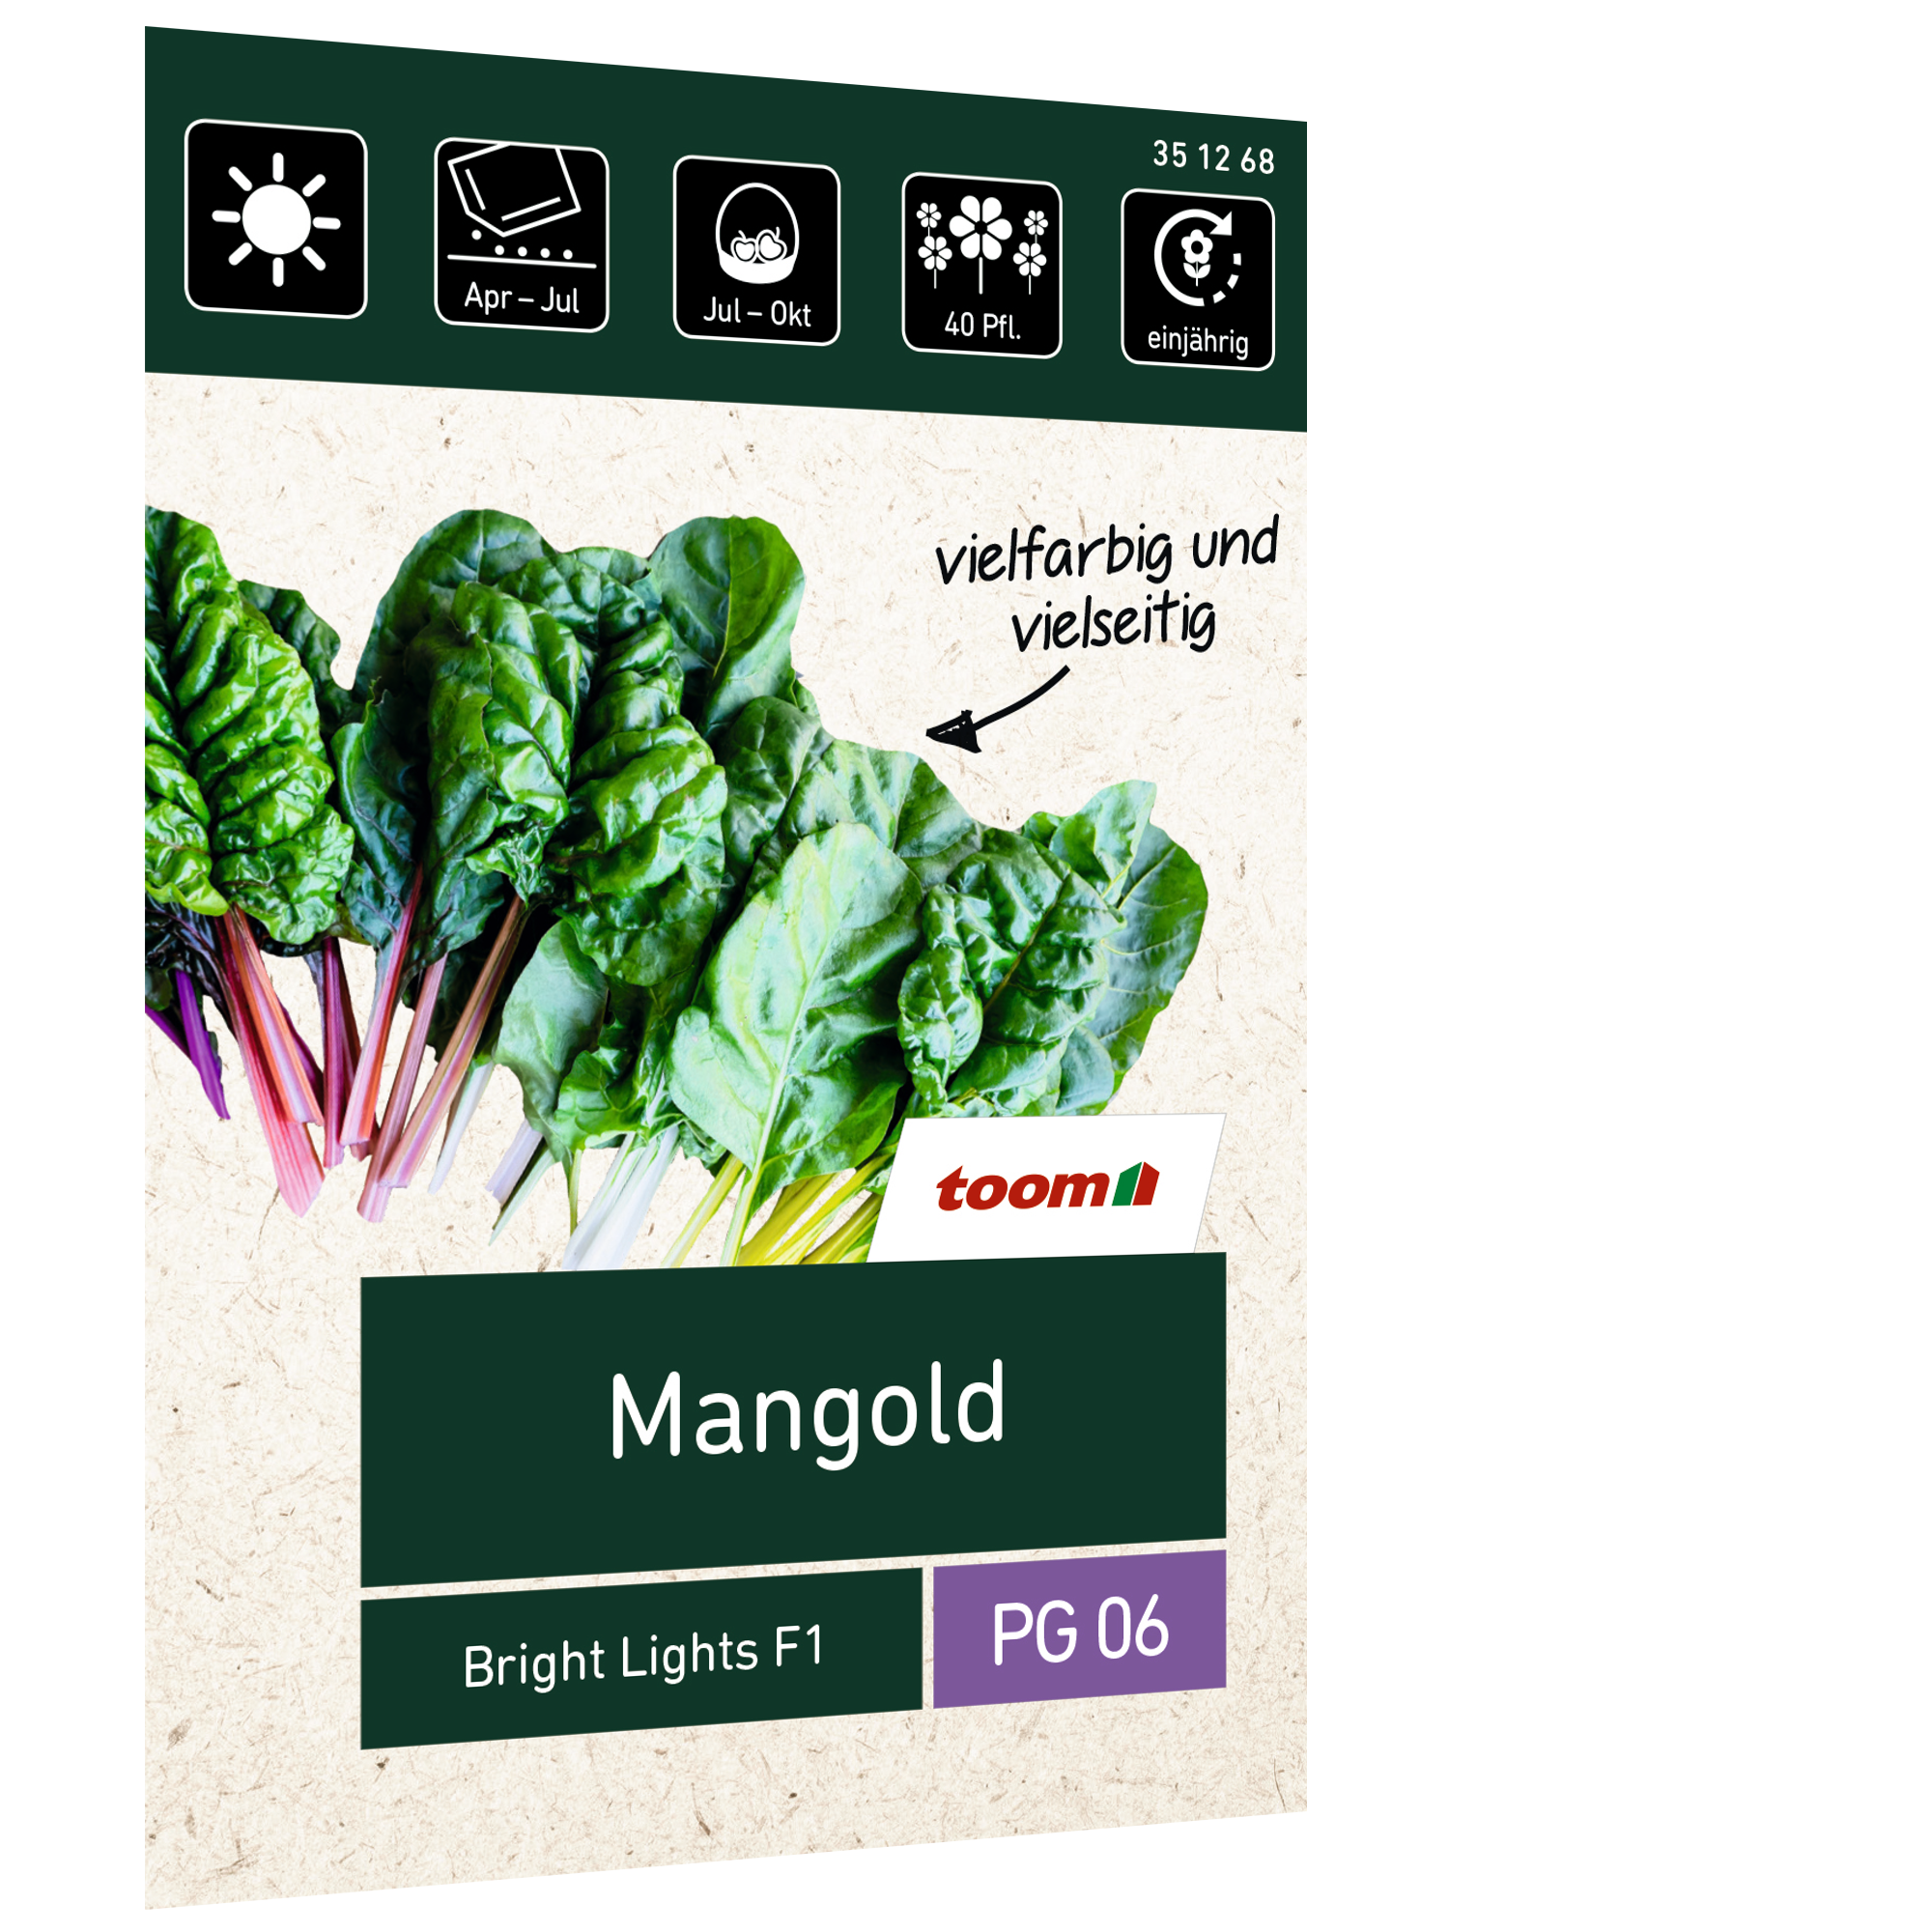 Mangold 'Bright Lights F1' + product picture